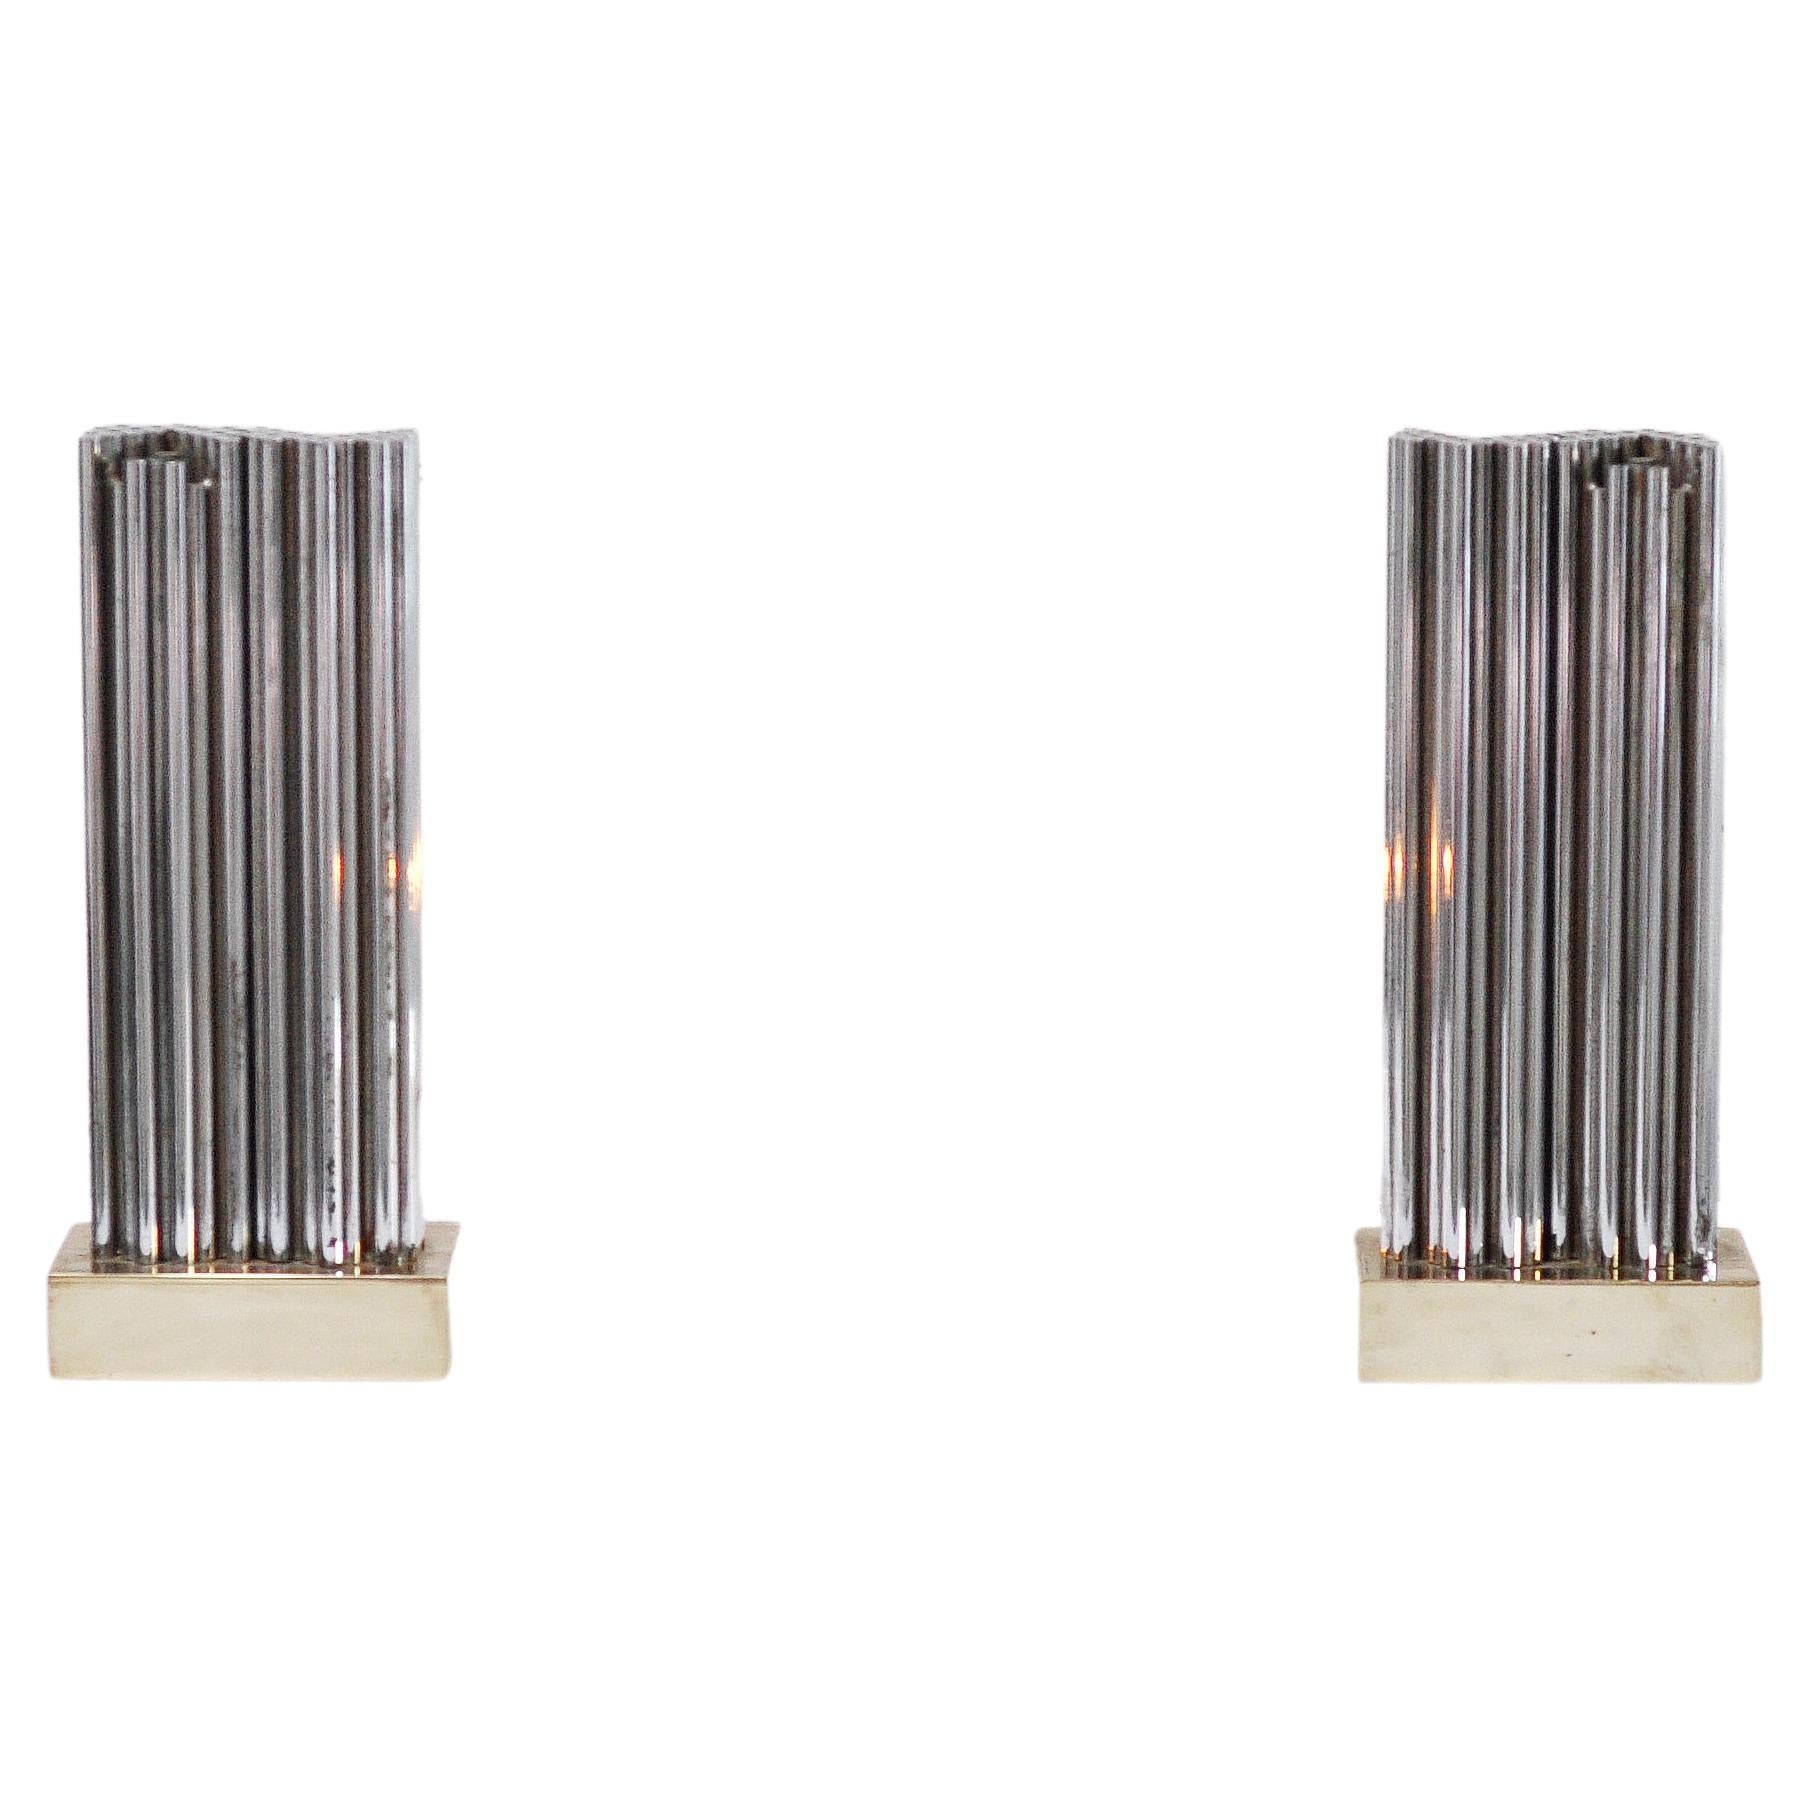 Pair of Brass & Metal Sculptural Lamps by Georges Mathias, Belgium 1970s For Sale